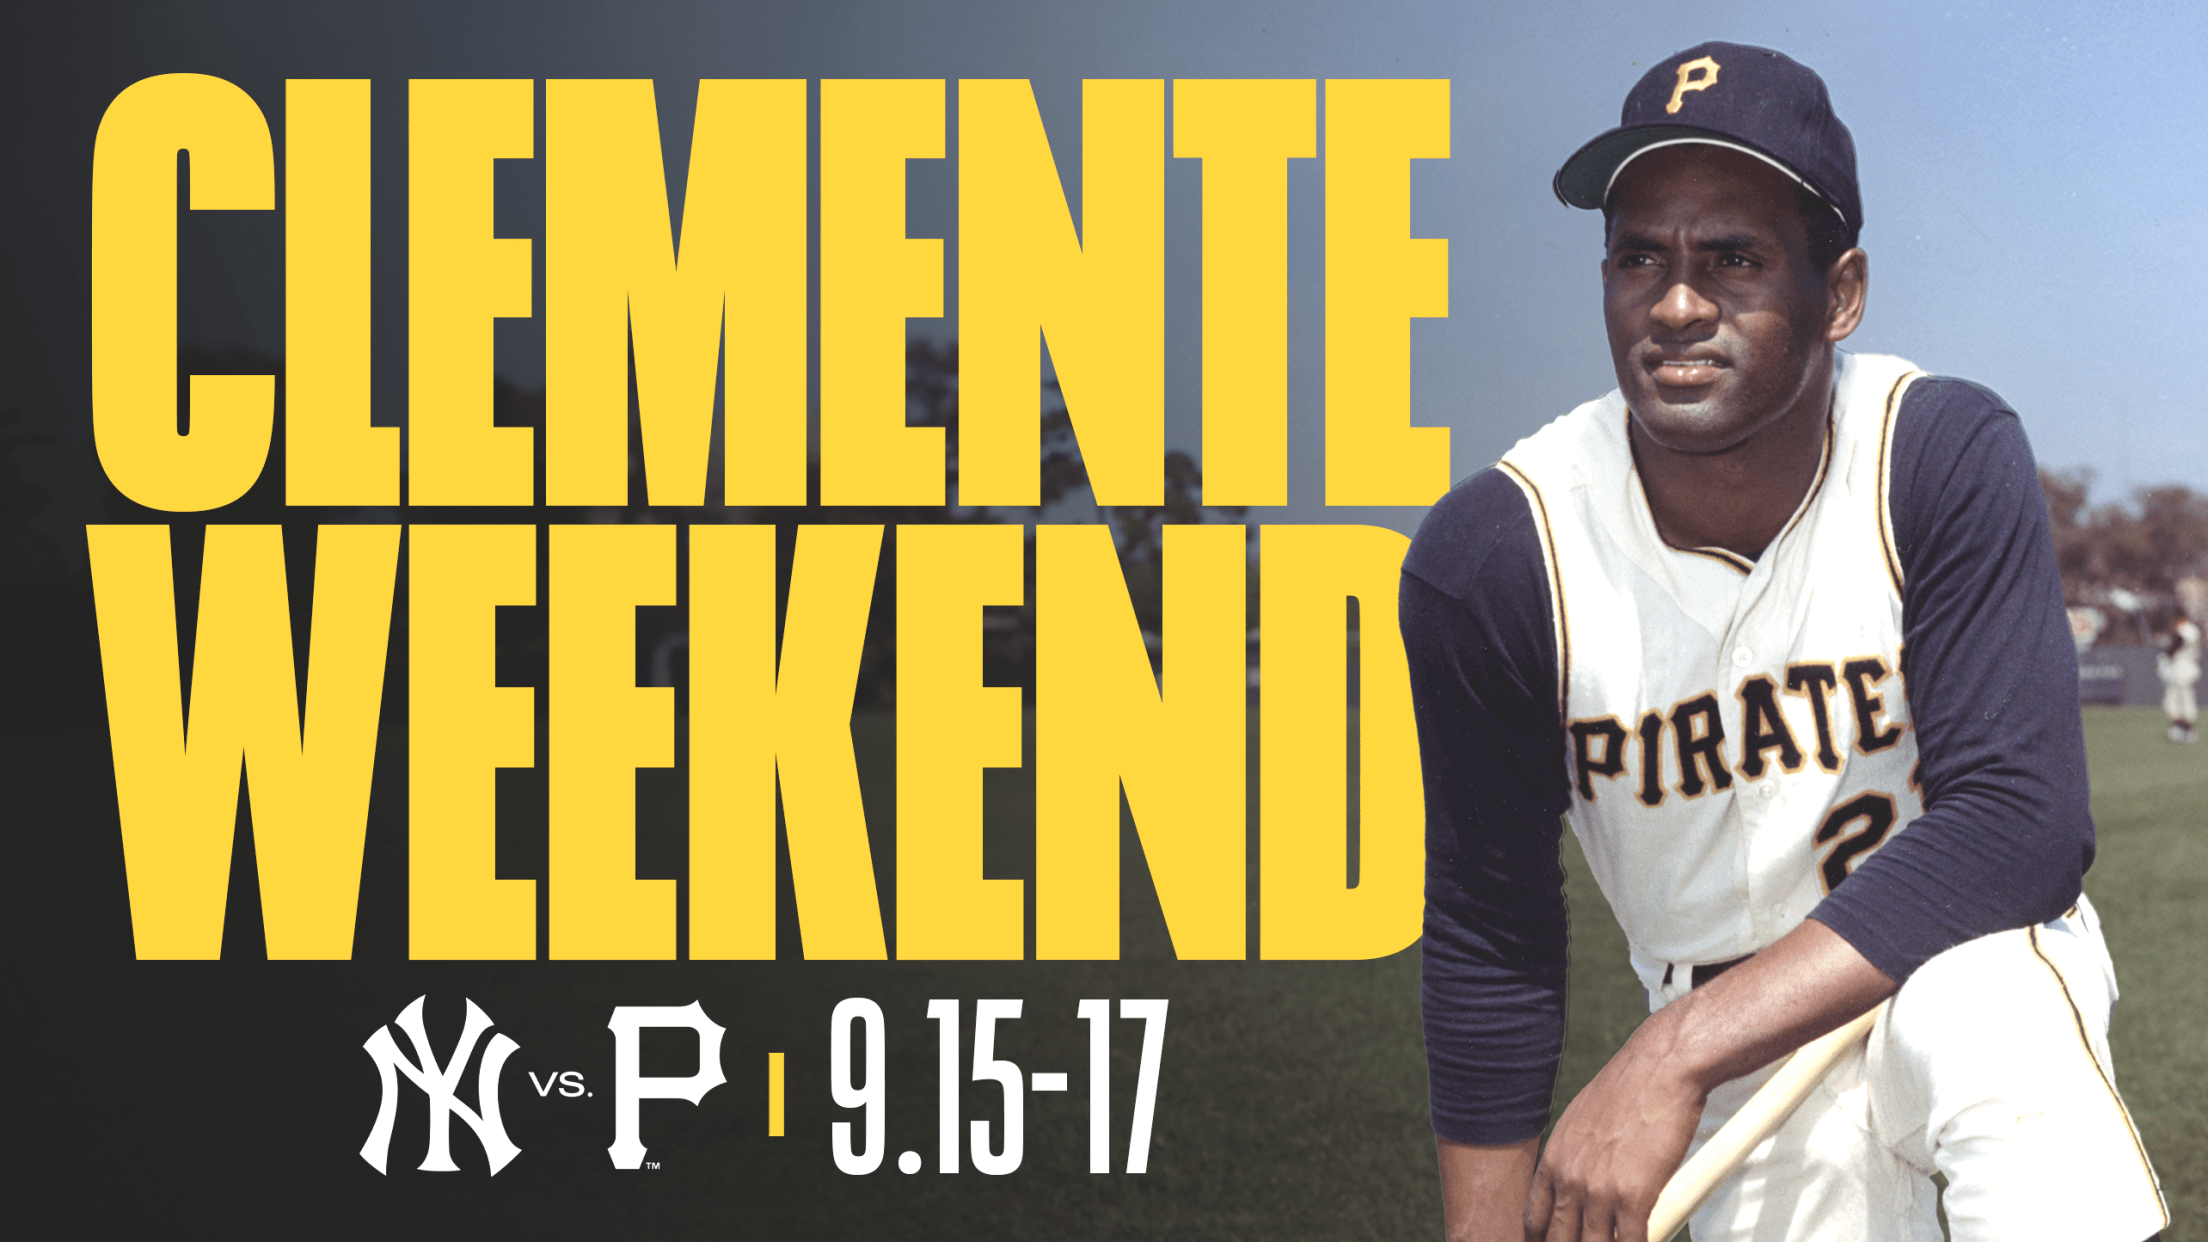 The Pirates to wear 21 tomorrow (September 15) in honor of Clemente